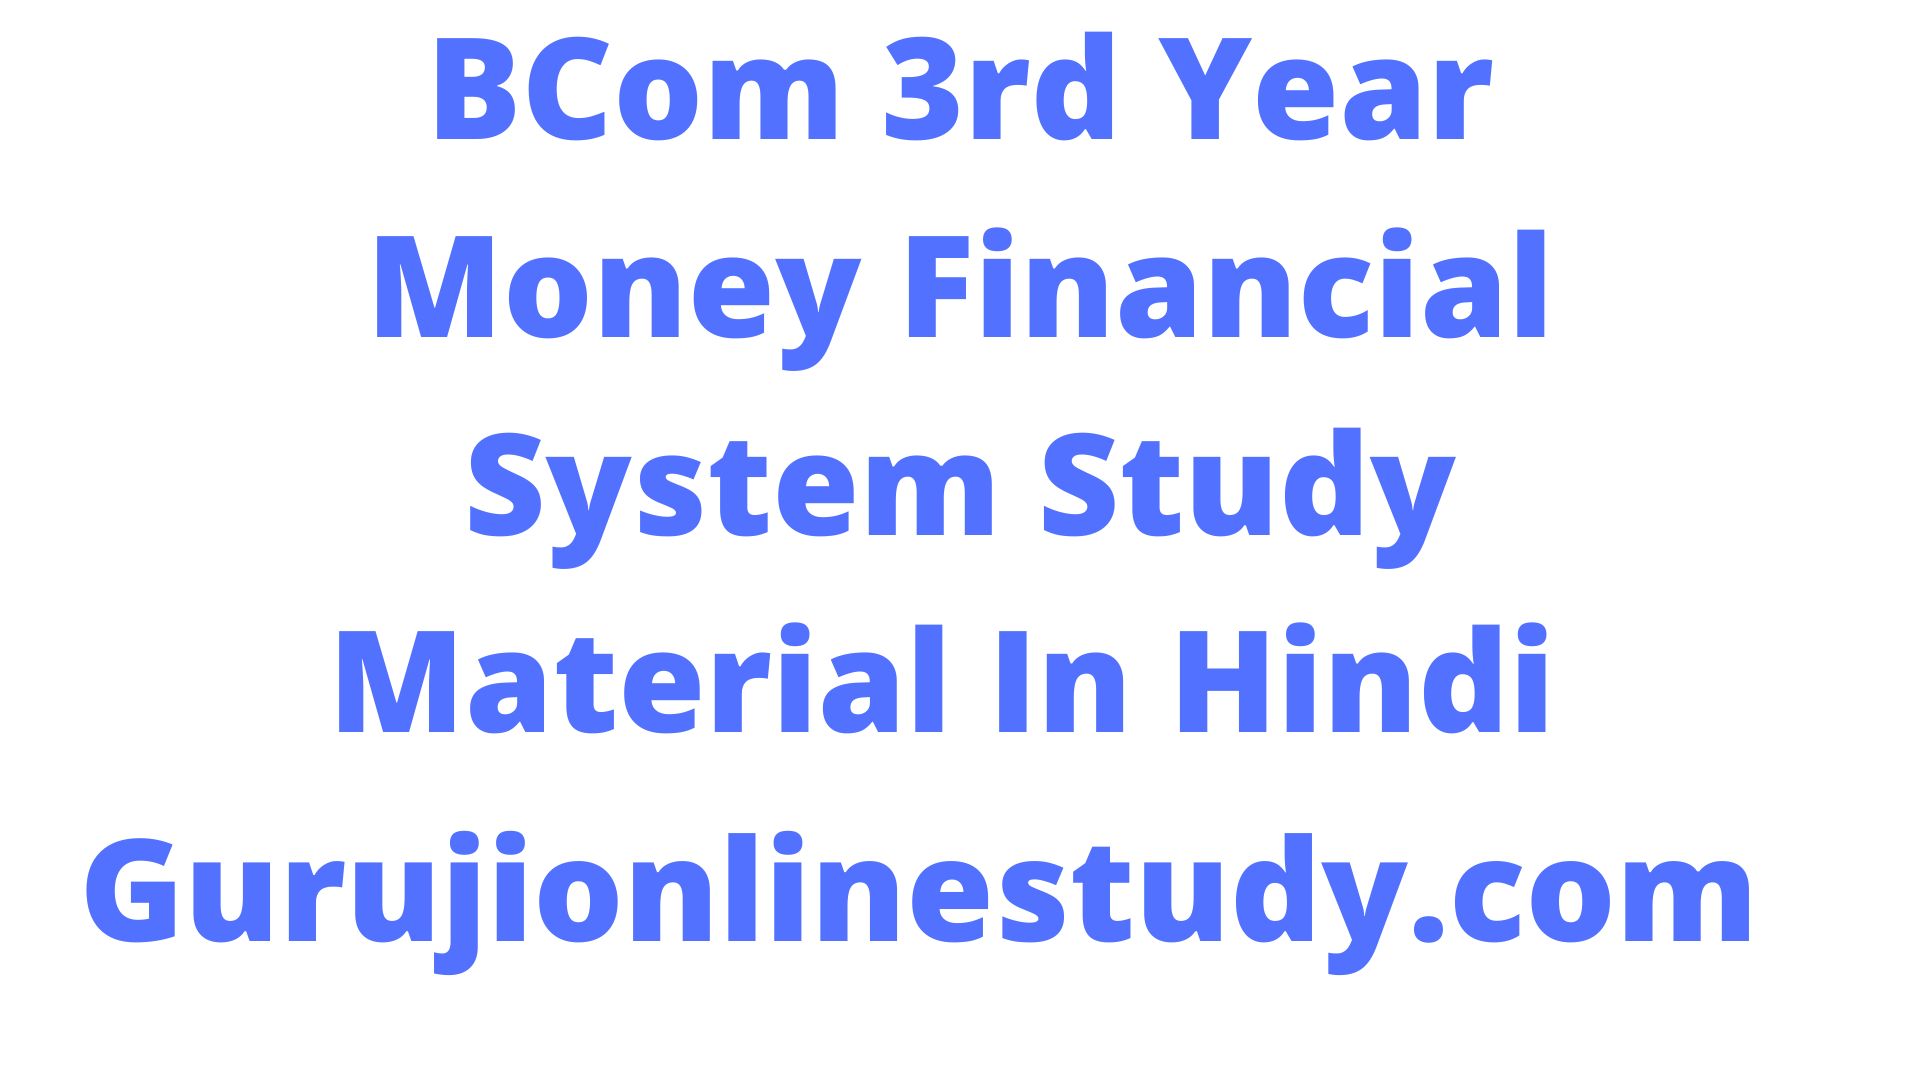 Electronic Money Financial System 